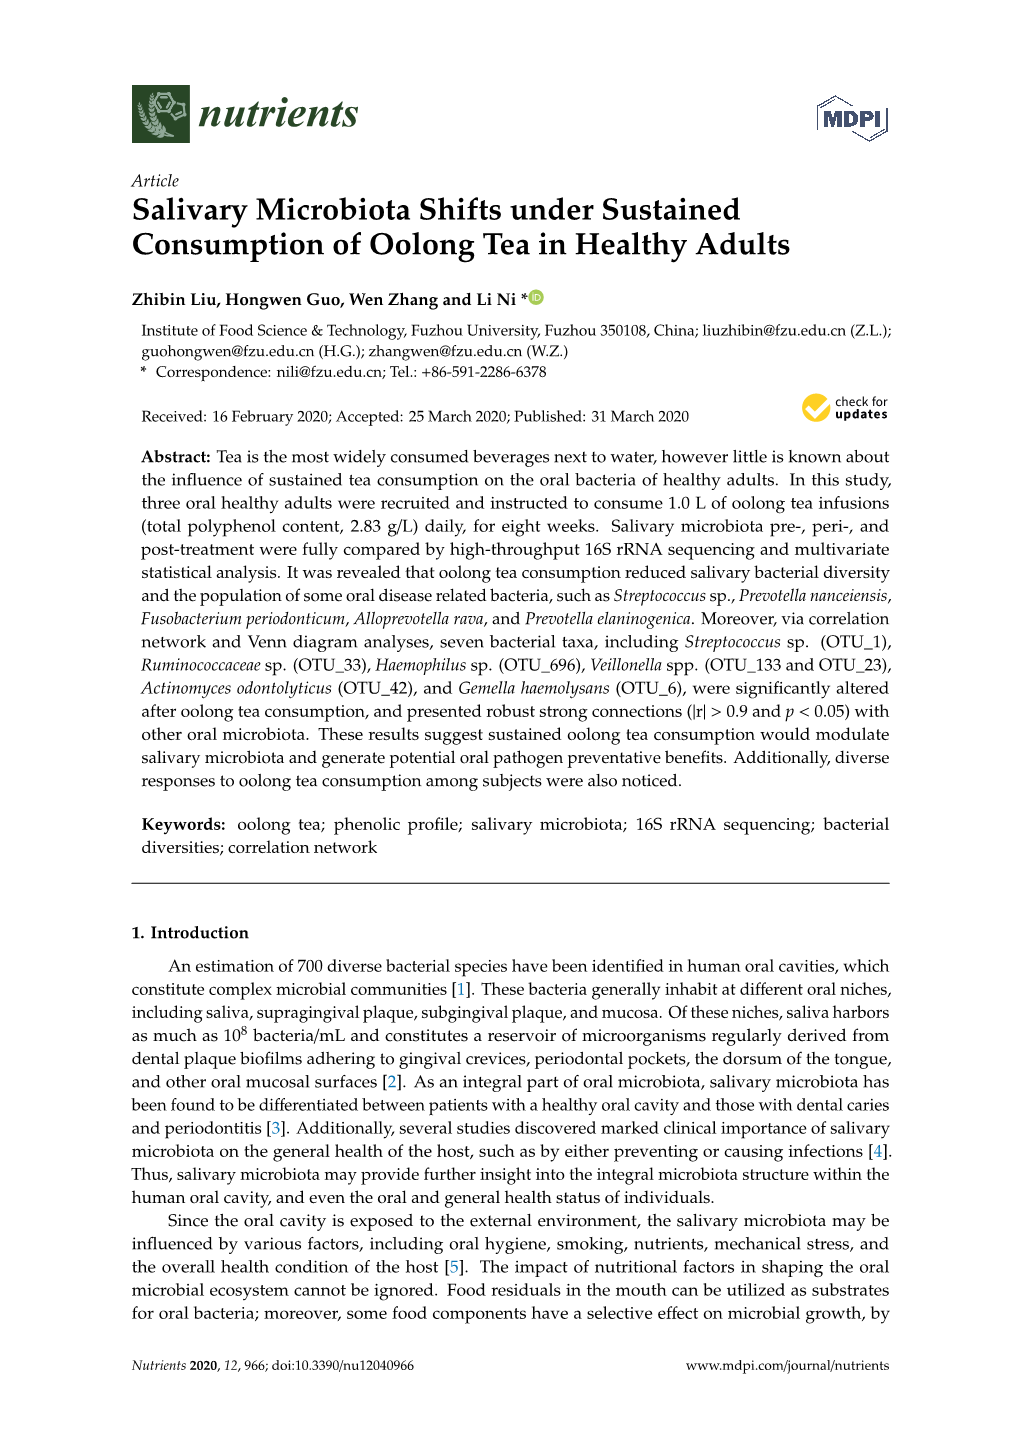 Salivary Microbiota Shifts Under Sustained Consumption of Oolong Tea in Healthy Adults